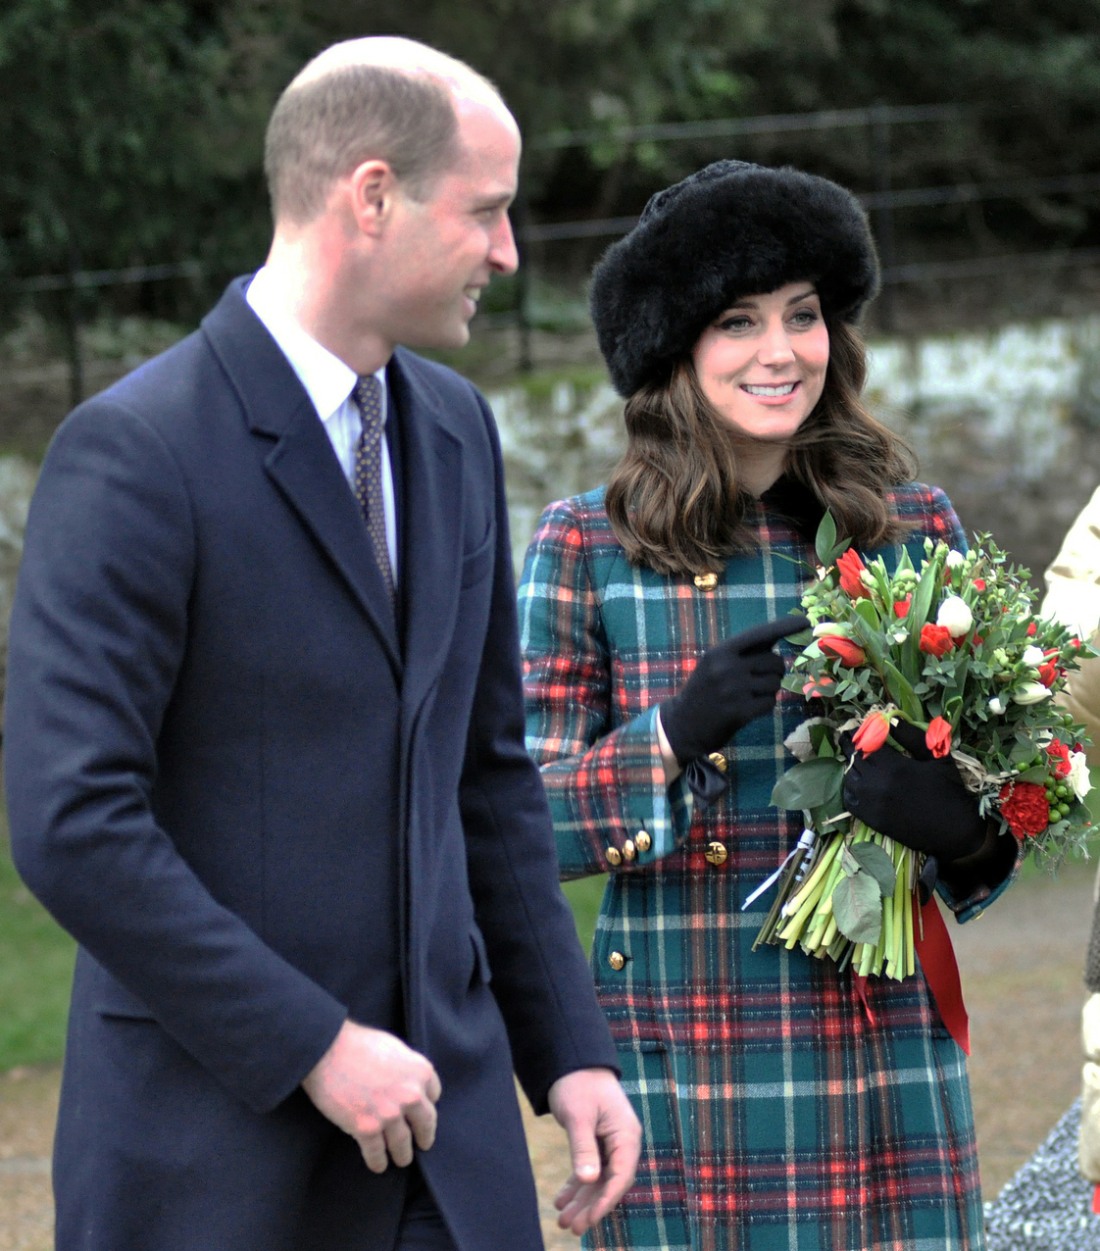 Prince William, Duke of Cambridge, and Catherine, Duchess of Cambridge, at Sandringham Church for the royal family's traditional Christmas Day service